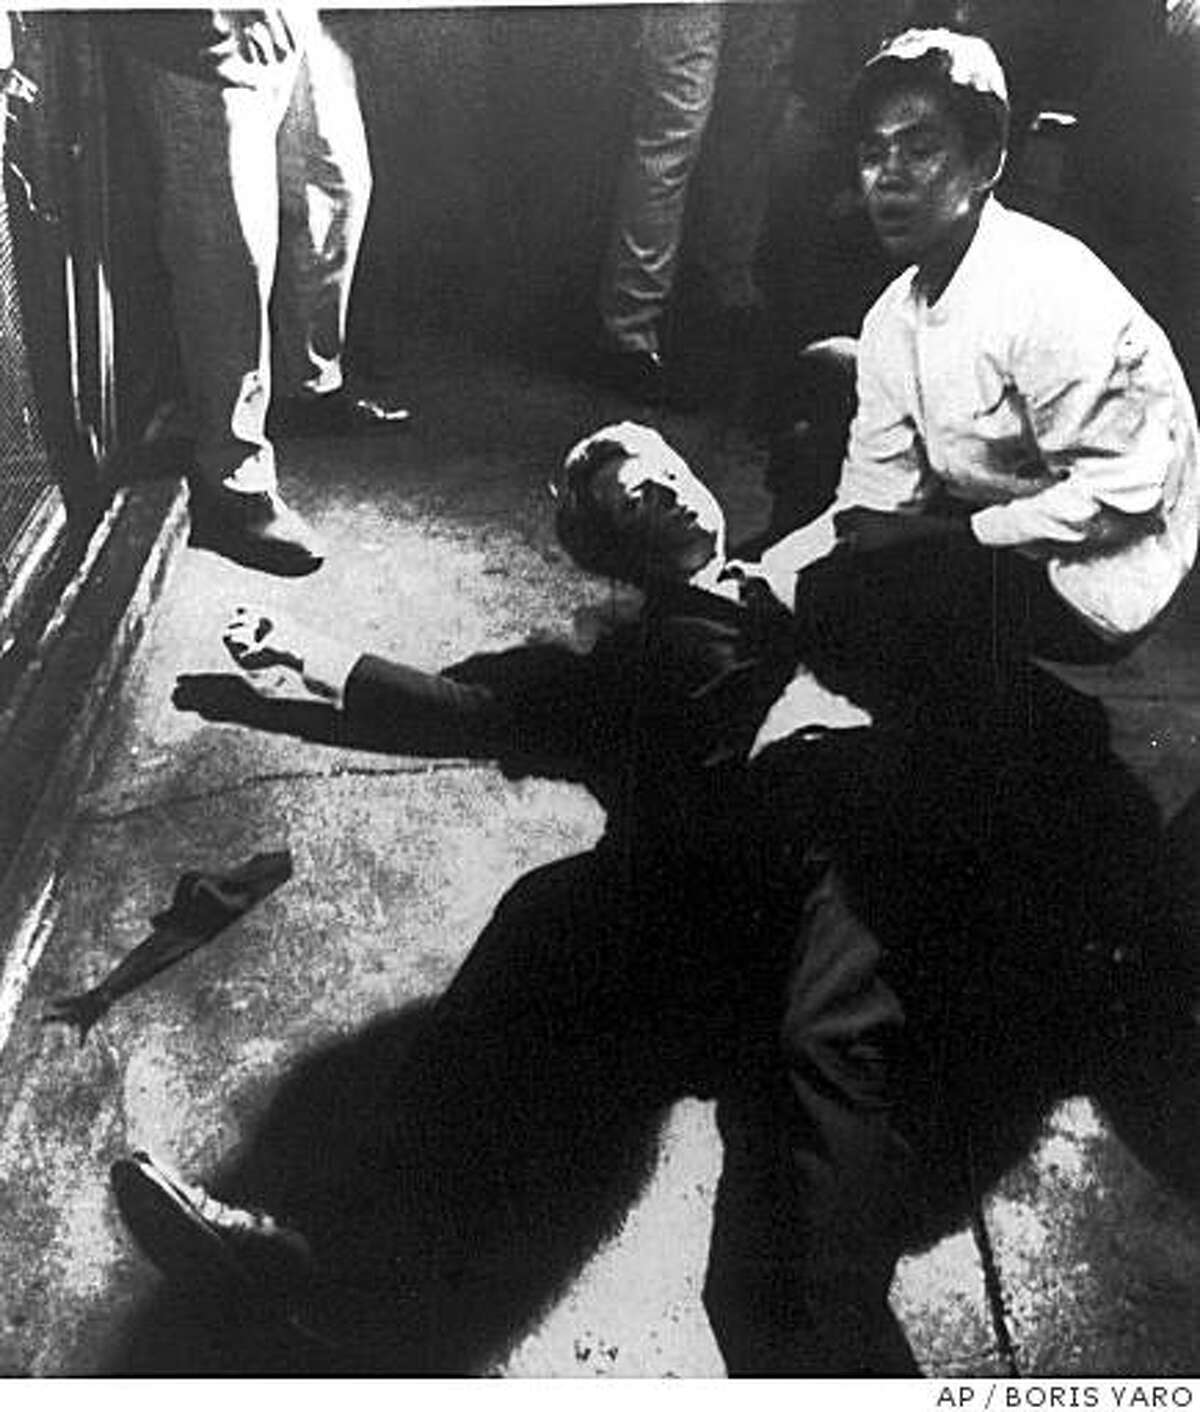 ** FILE ** Sen. Robert Kennedy awaits medical assistance as he lies on the floor of the Ambassador Hotel in this file photo taken June 5, 1968, in Los Angeles moments after he was shot. If all goes as planned, carefully crated pieces of the room where Kennedy was assassinated will be stored on a garbage-strewn lot with a view of graffiti-covered buildings and a strip club billboard. (AP Photo/Los Angeles Times, Boris Yaro, File)